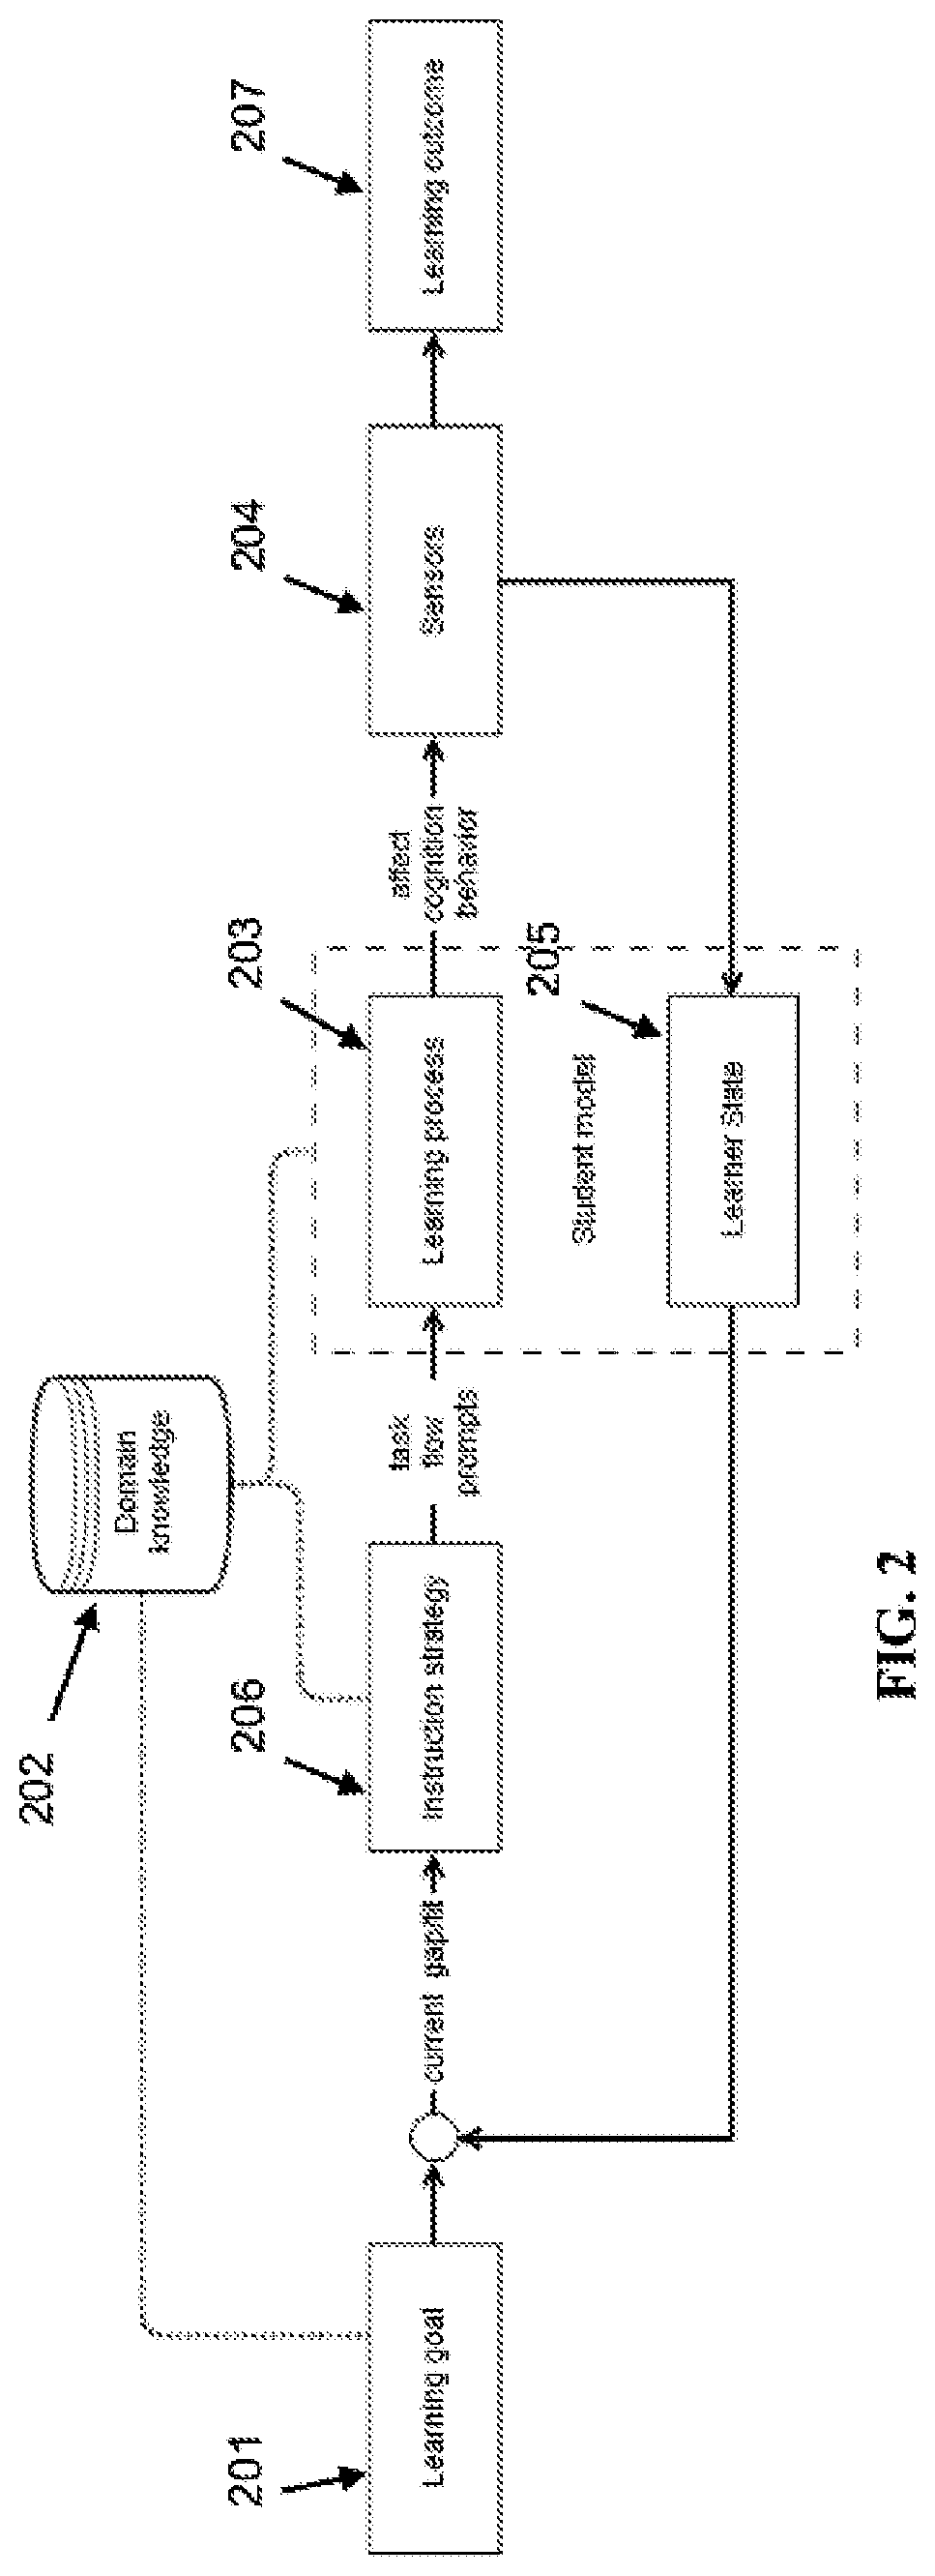 Interactive and adaptive learning and neurocognitive disorder diagnosis systems using face tracking and emotion detection with associated methods